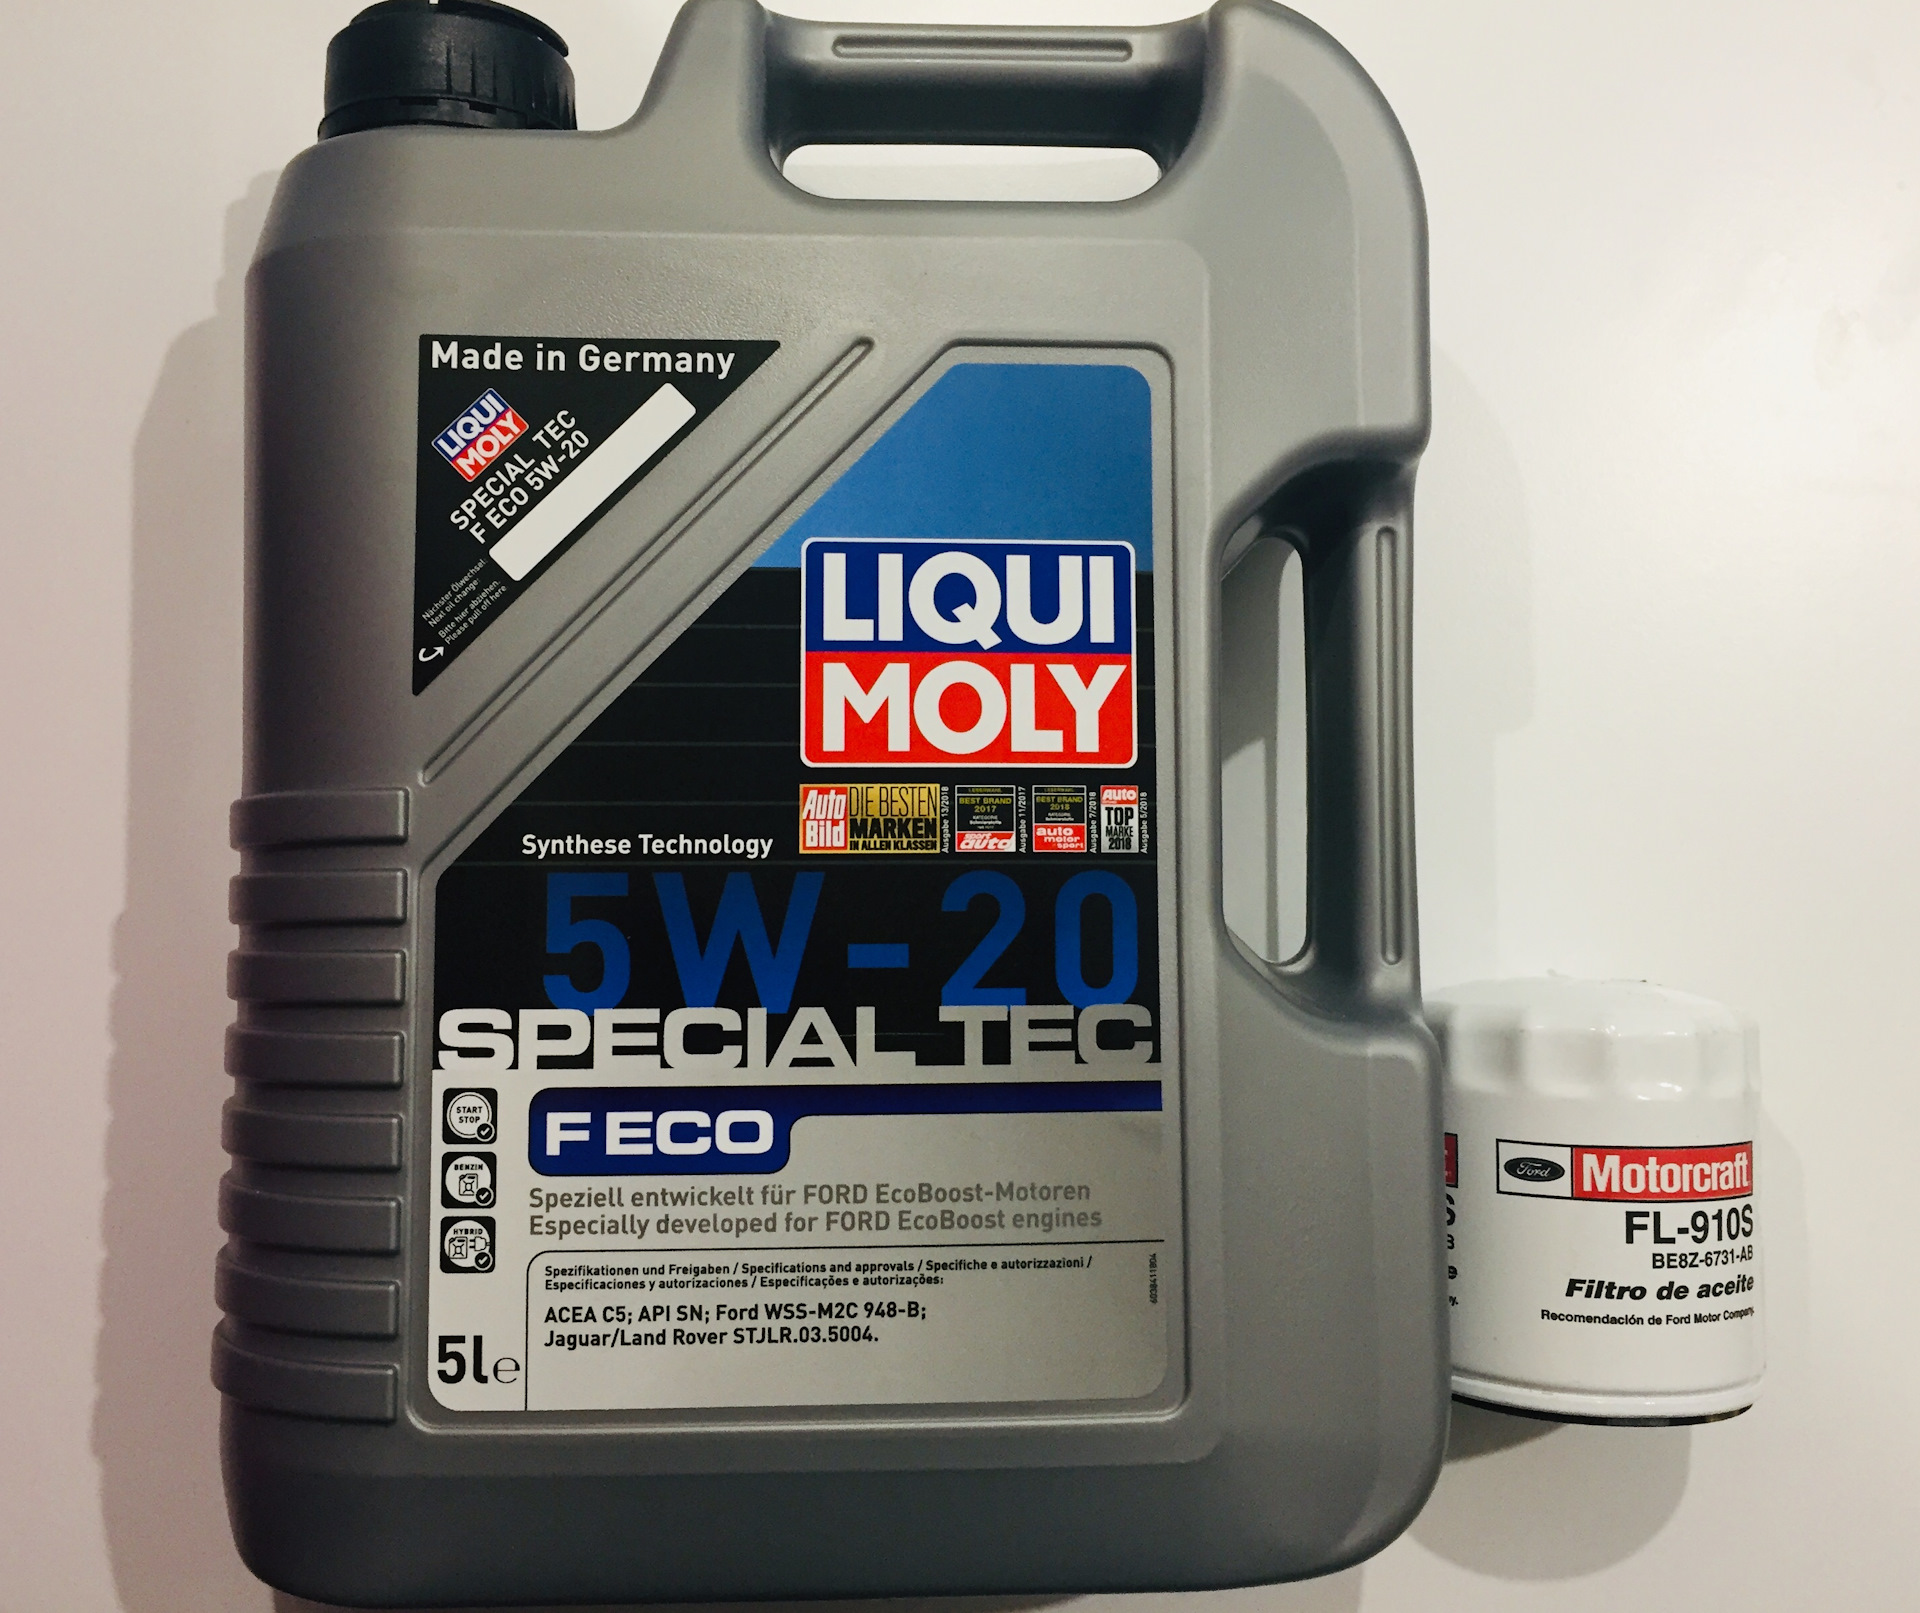 Масло ford ecoboost. Ликви моли 5w20. Liqui Moly 5w20 Special Tec f Eco. WSS-m2c948-b 5w20. Ford m2c948-b Ликви моли.